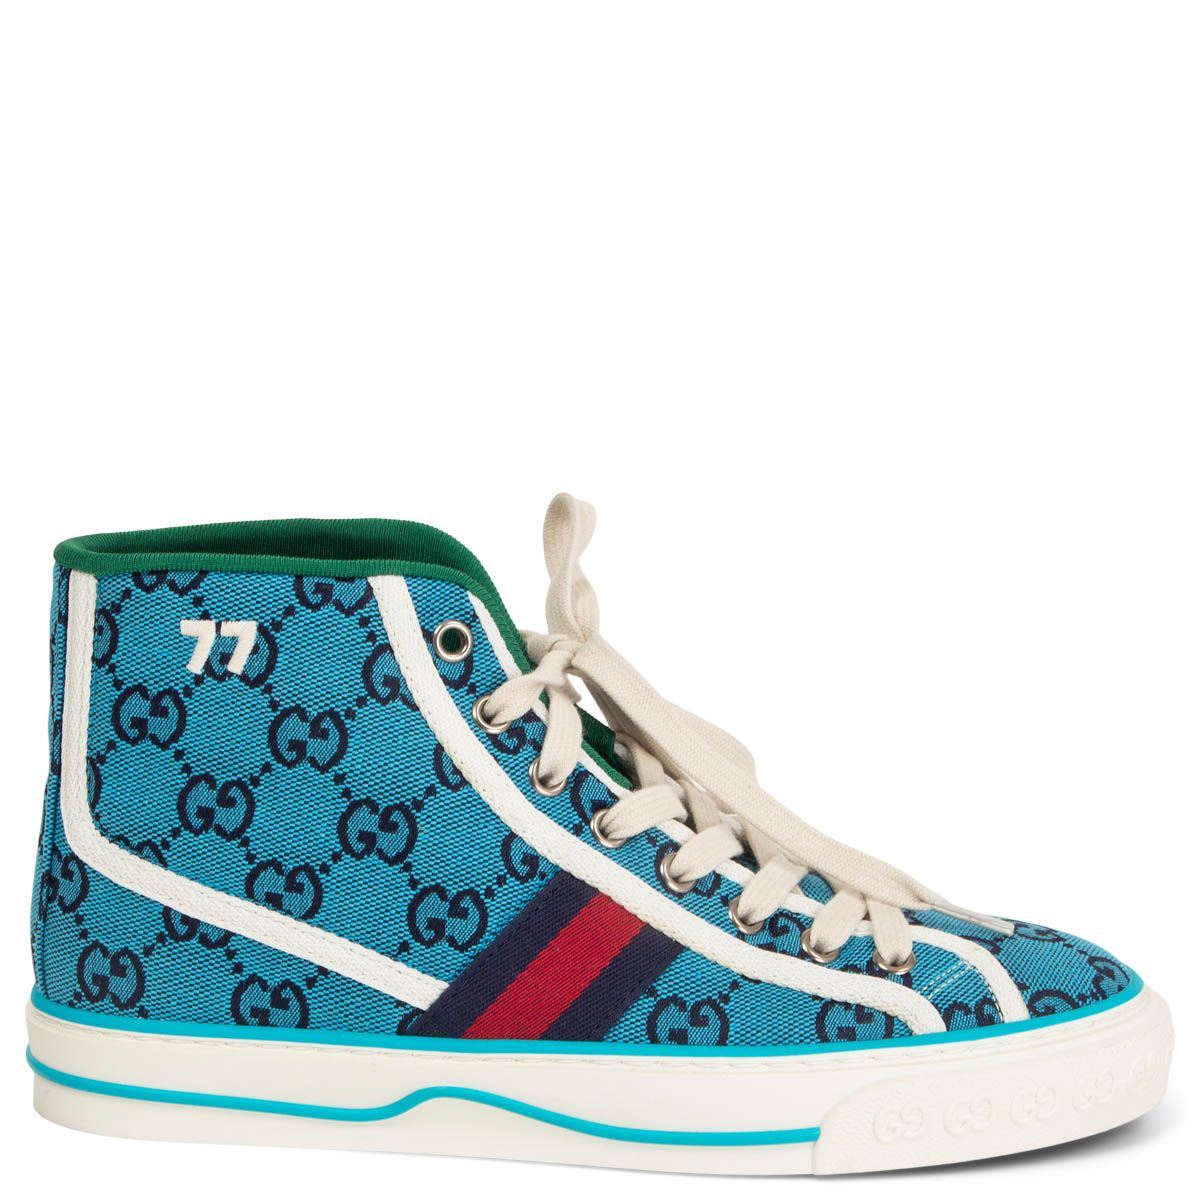 Gucci Tennis 1977 High Top Sneaker Turquoise